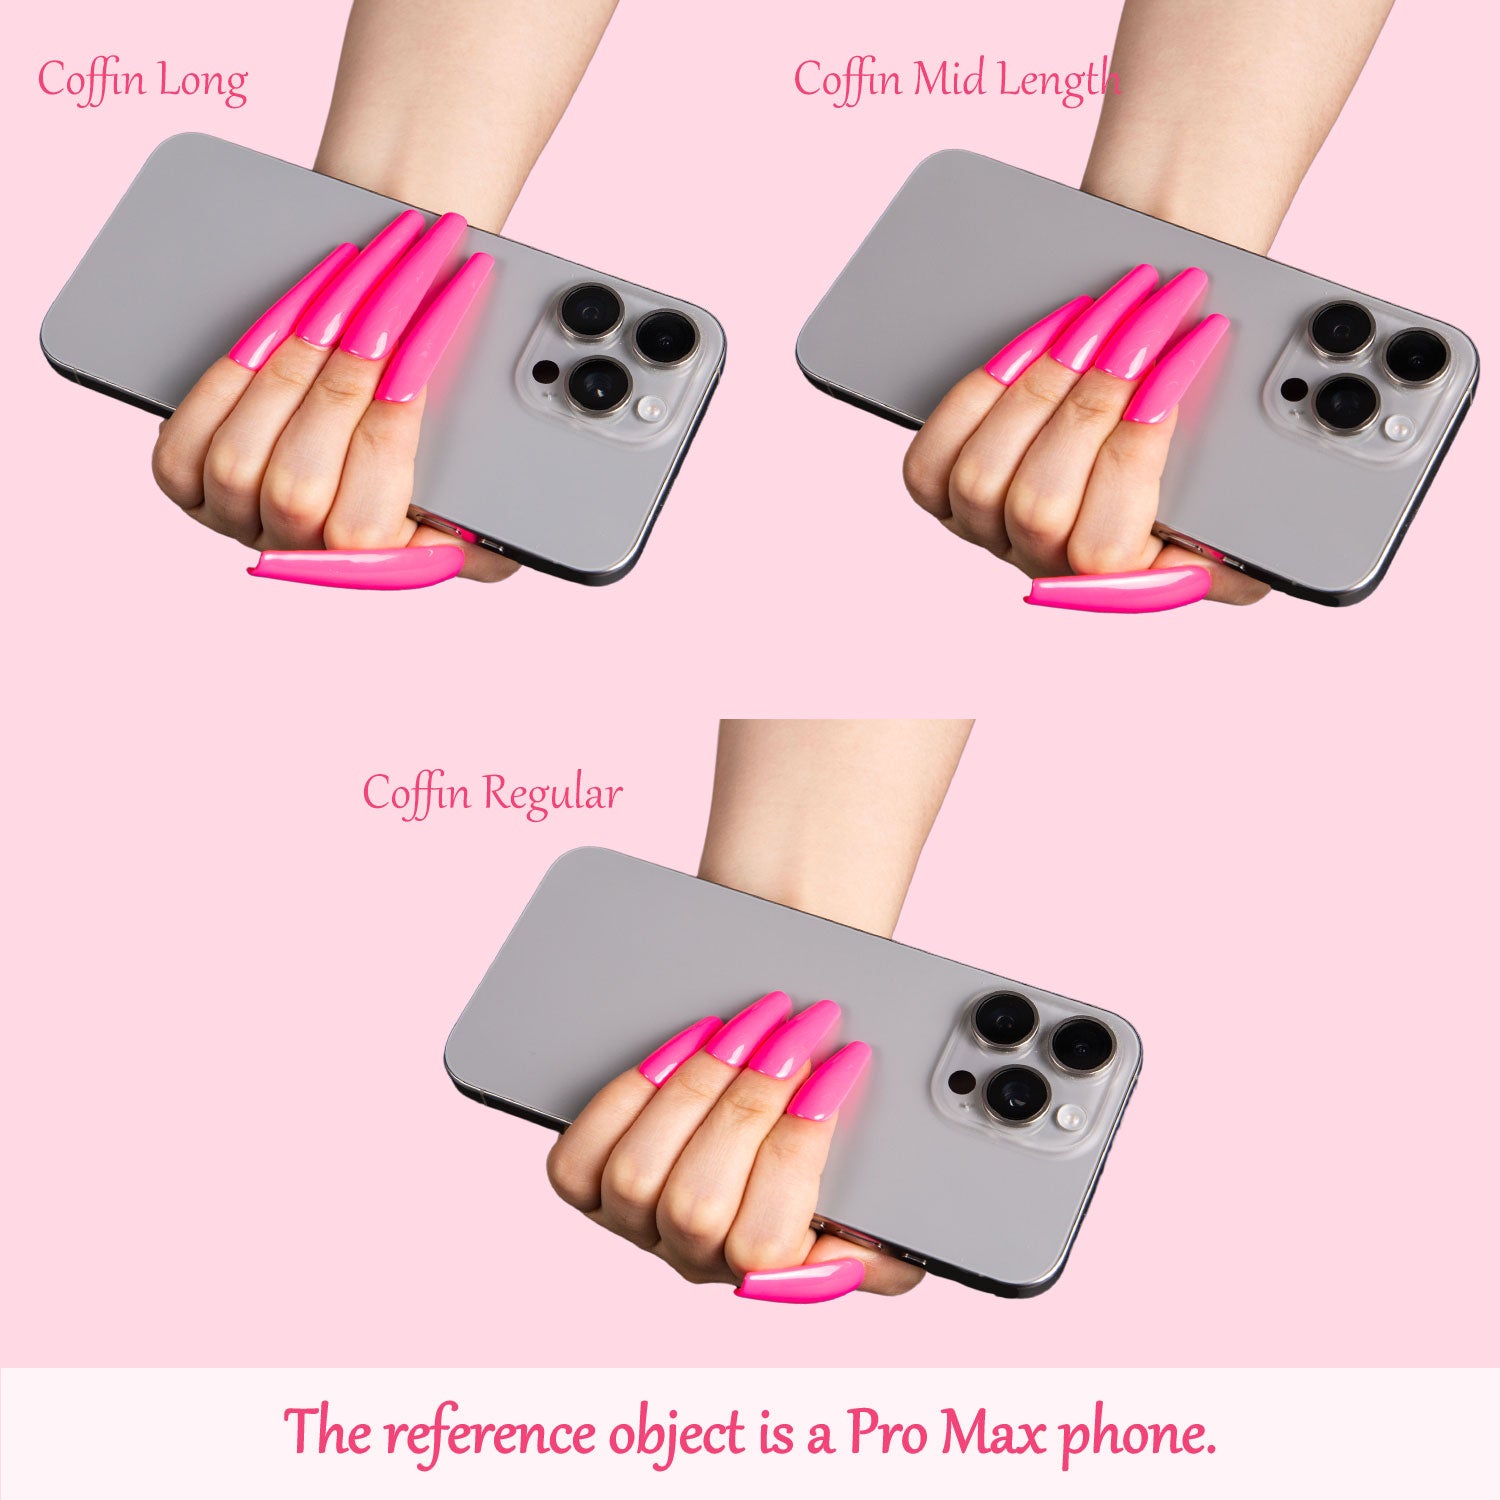 Three hand holding a Pro Max phone showcasing Lovful's coffin-shaped bright pink press-on nails in varying lengths: Coffin Long, Coffin Mid Length, and Coffin Regular.